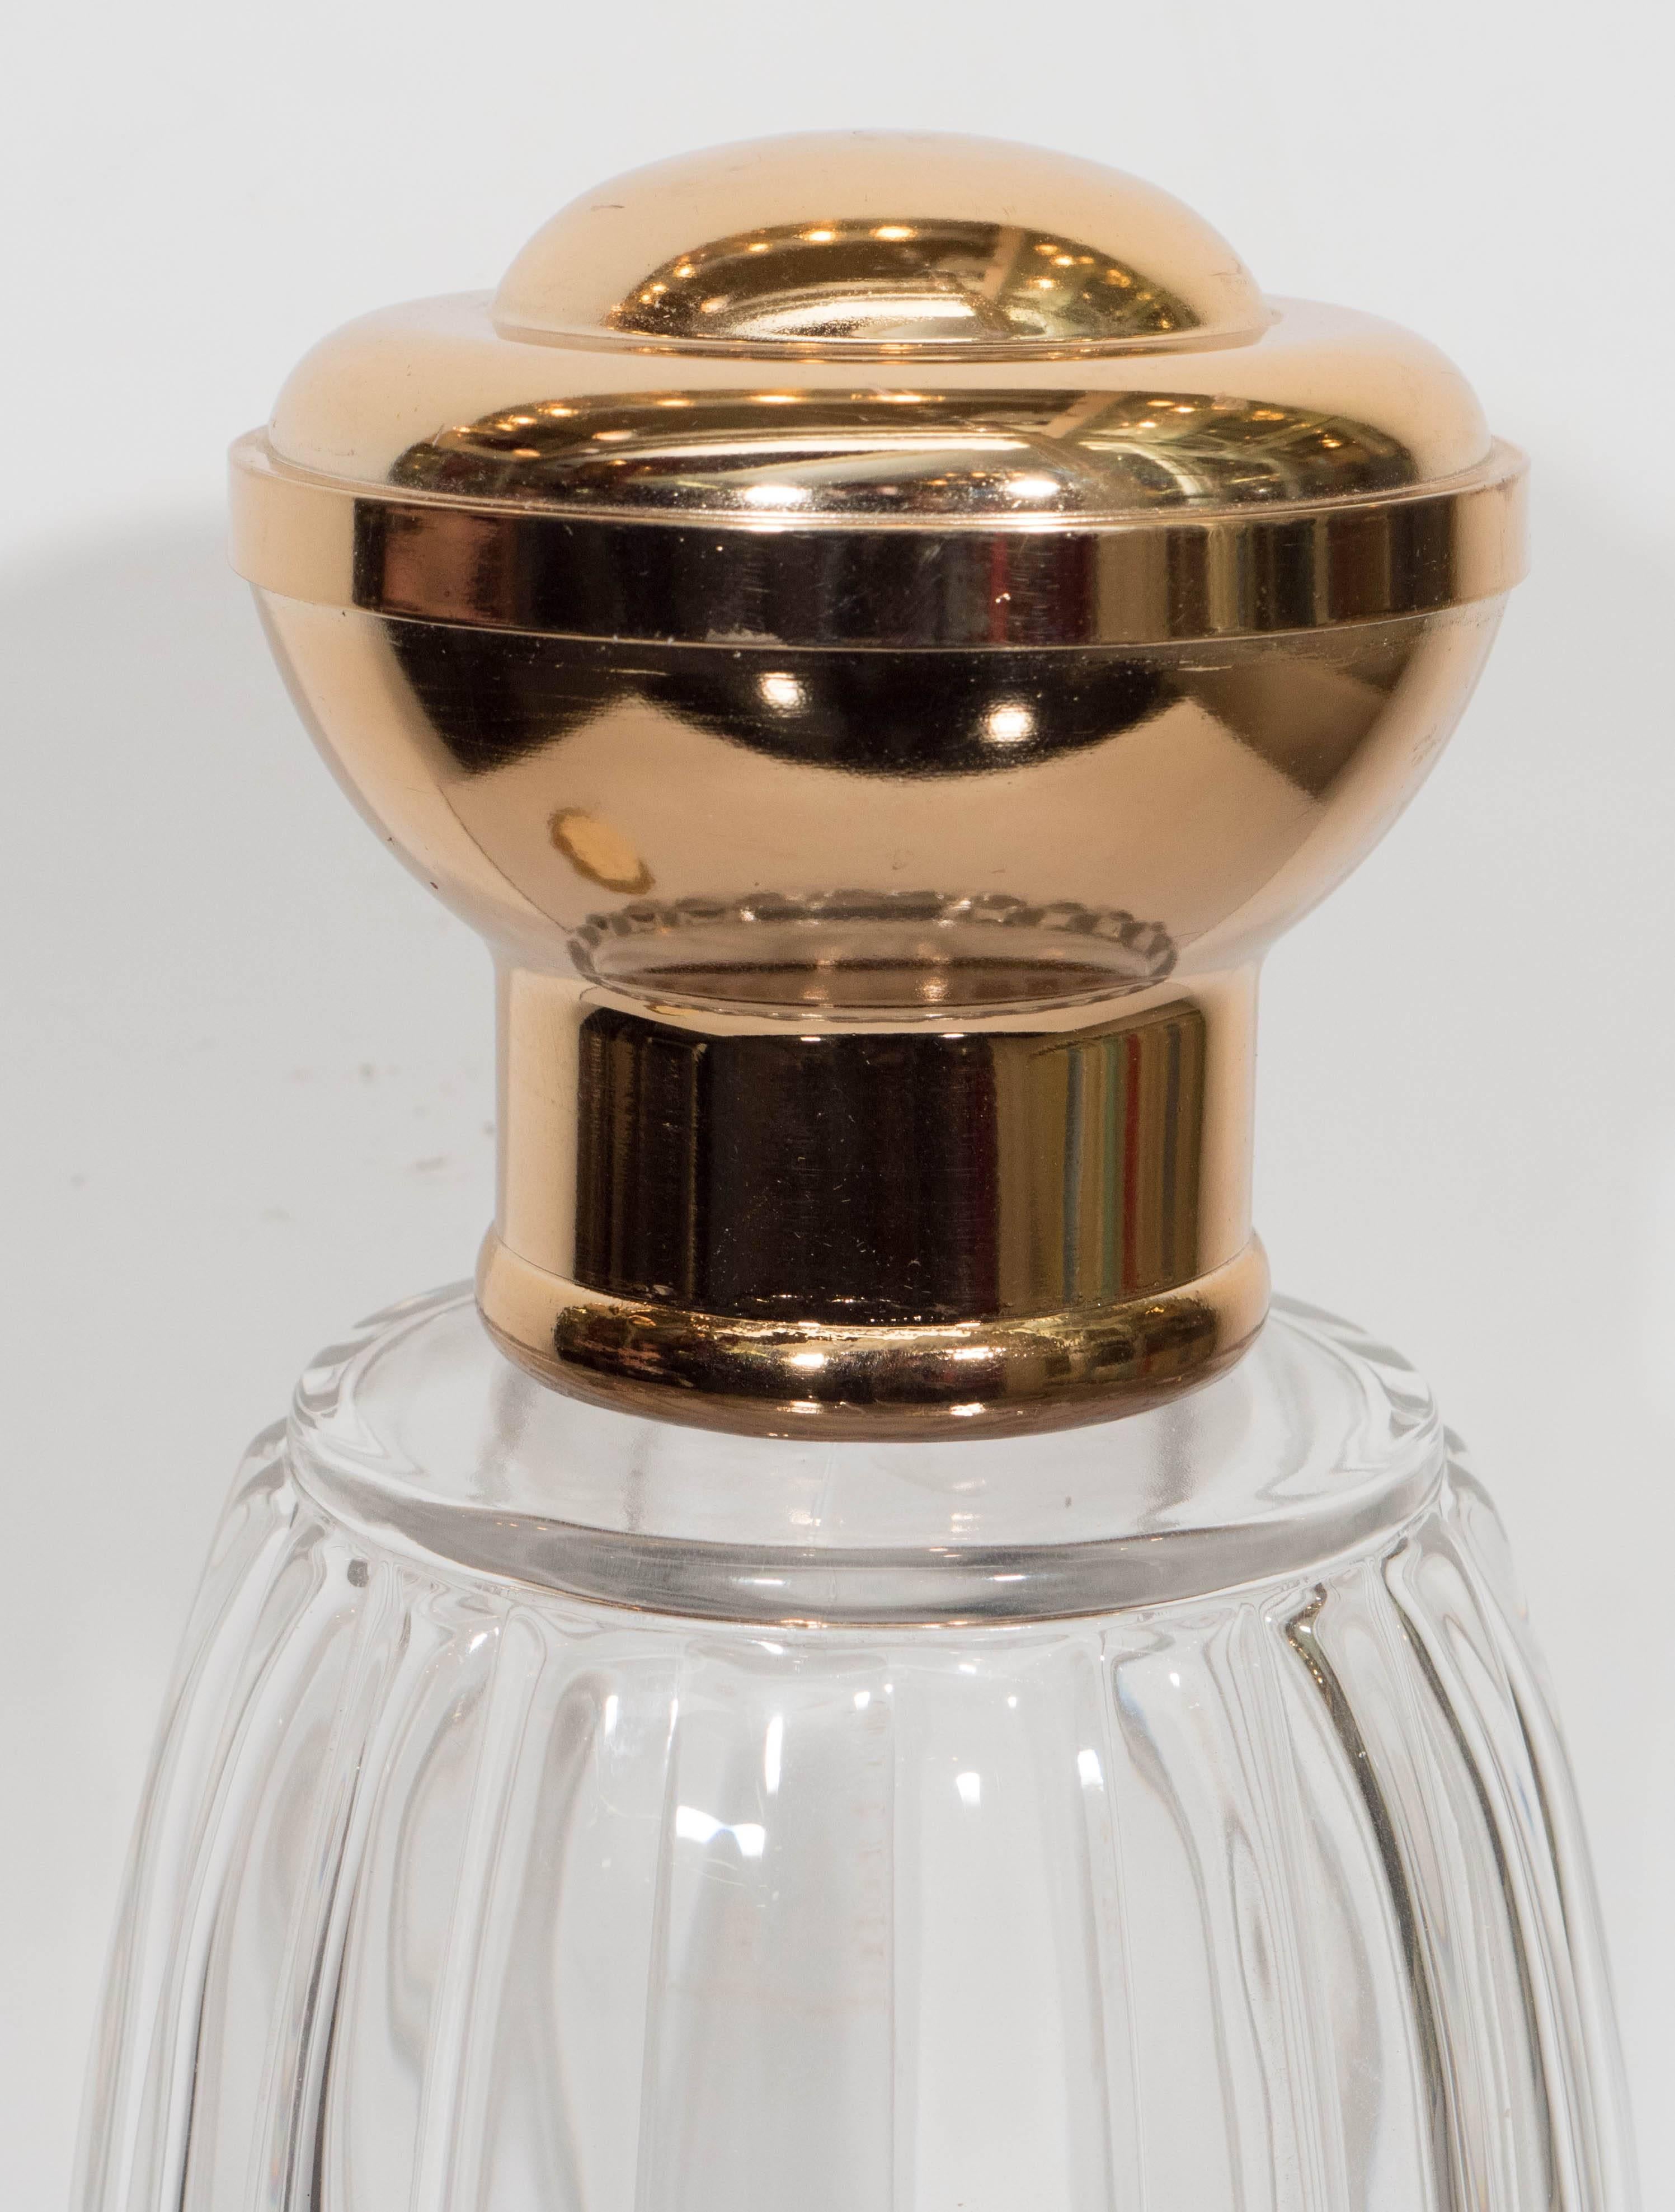 A large-scale factice boutique display bottle for Annick Goutal, with removable top on gadrooned glass body; opening to the bottom. Other than loss of spigot, this piece remains in very good condition.